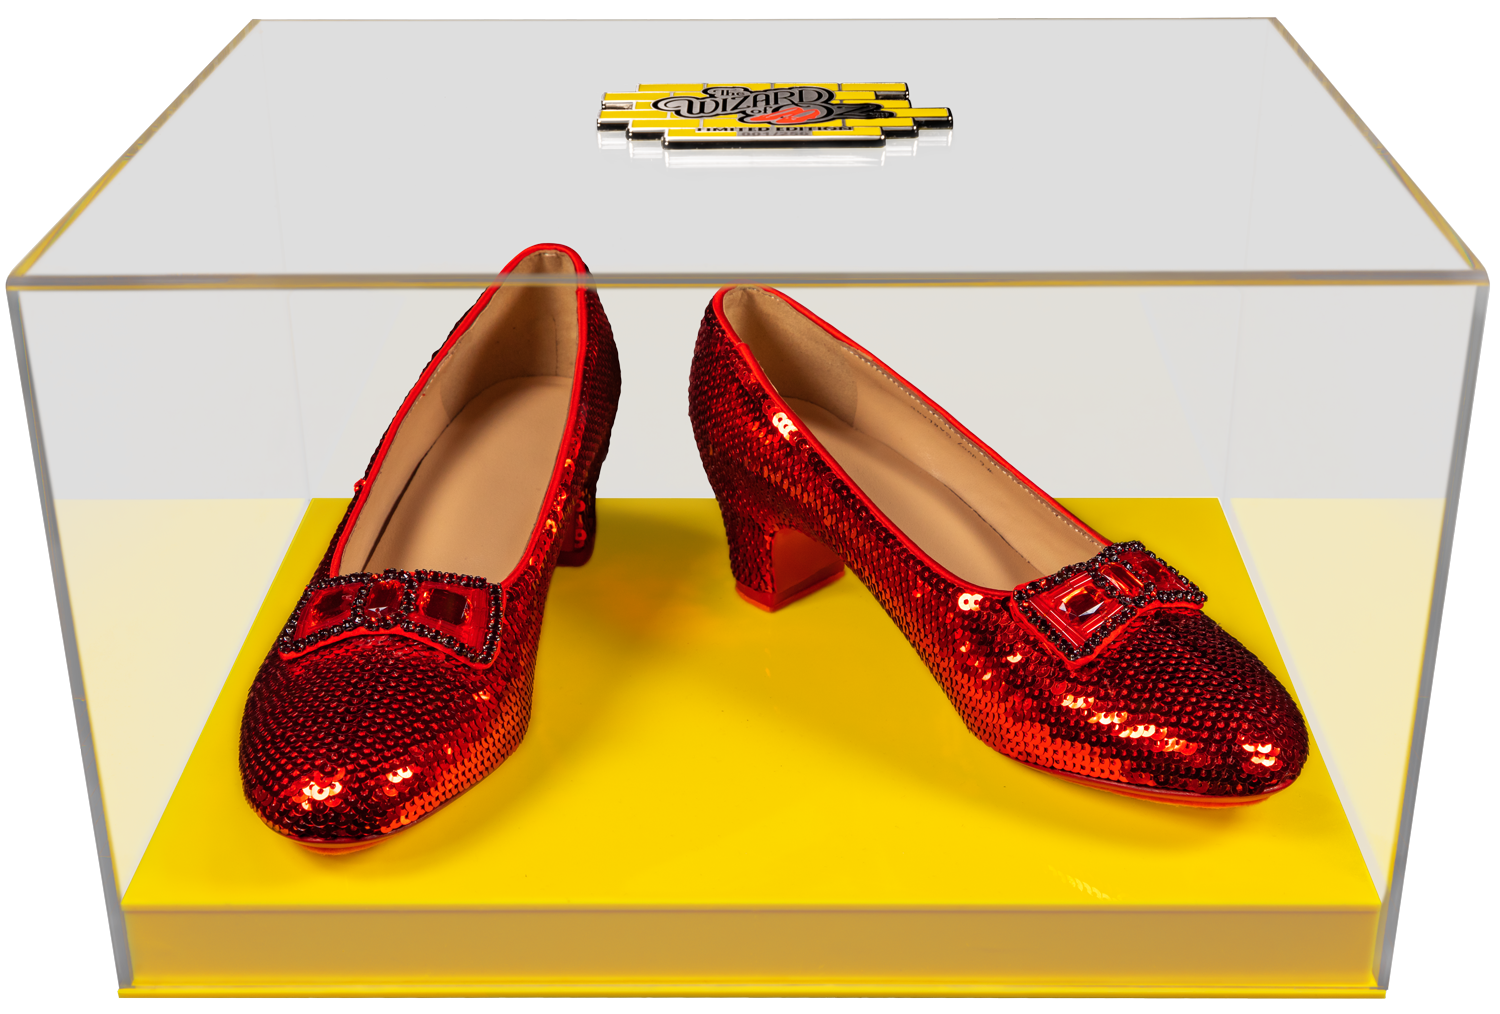 IKO1703--Wizard-of-Oz-Ruby-Slippers-in-case-V2-NEUT-01.png